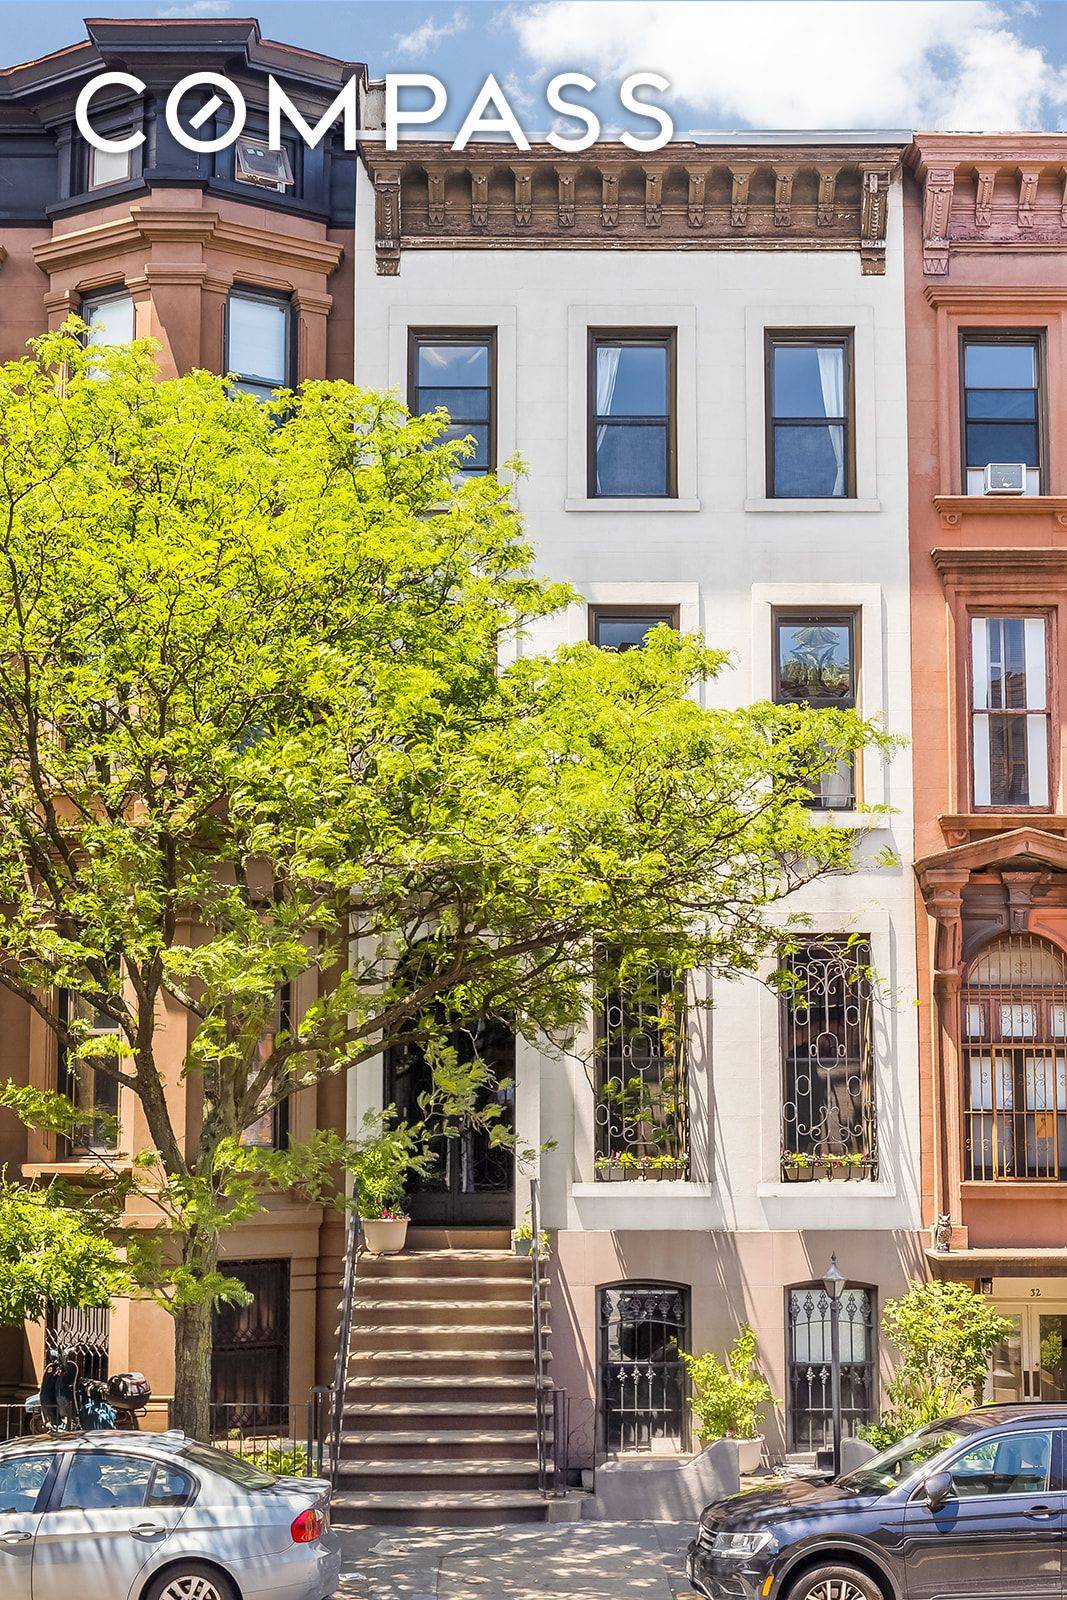 Built in 1873 by Edmund Kingsland, 34 7th Avenue is a beautiful 4, 000 square foot brownstone in the heart of North Park Slope, between Sterling Place and St.